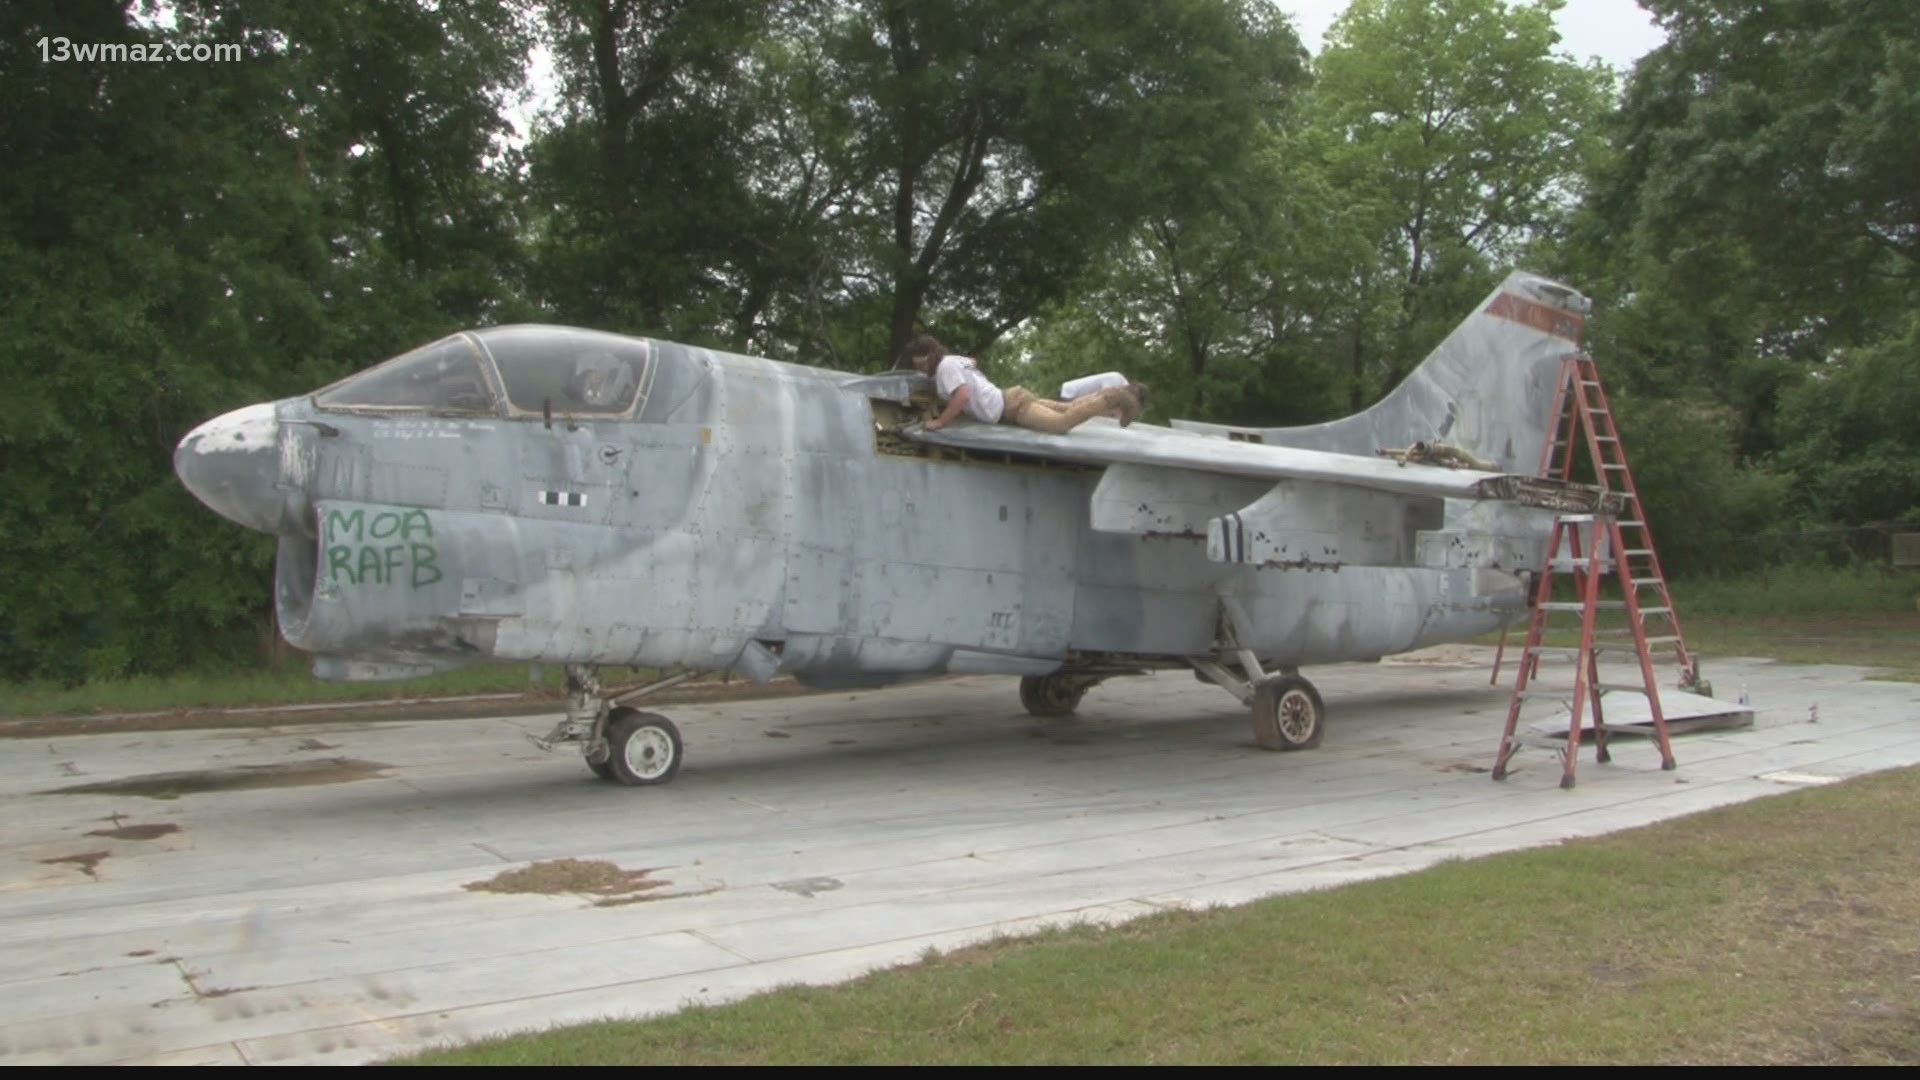 An old Vietnam War-era aircraft is being restored and is expected to be on display by the end of the year